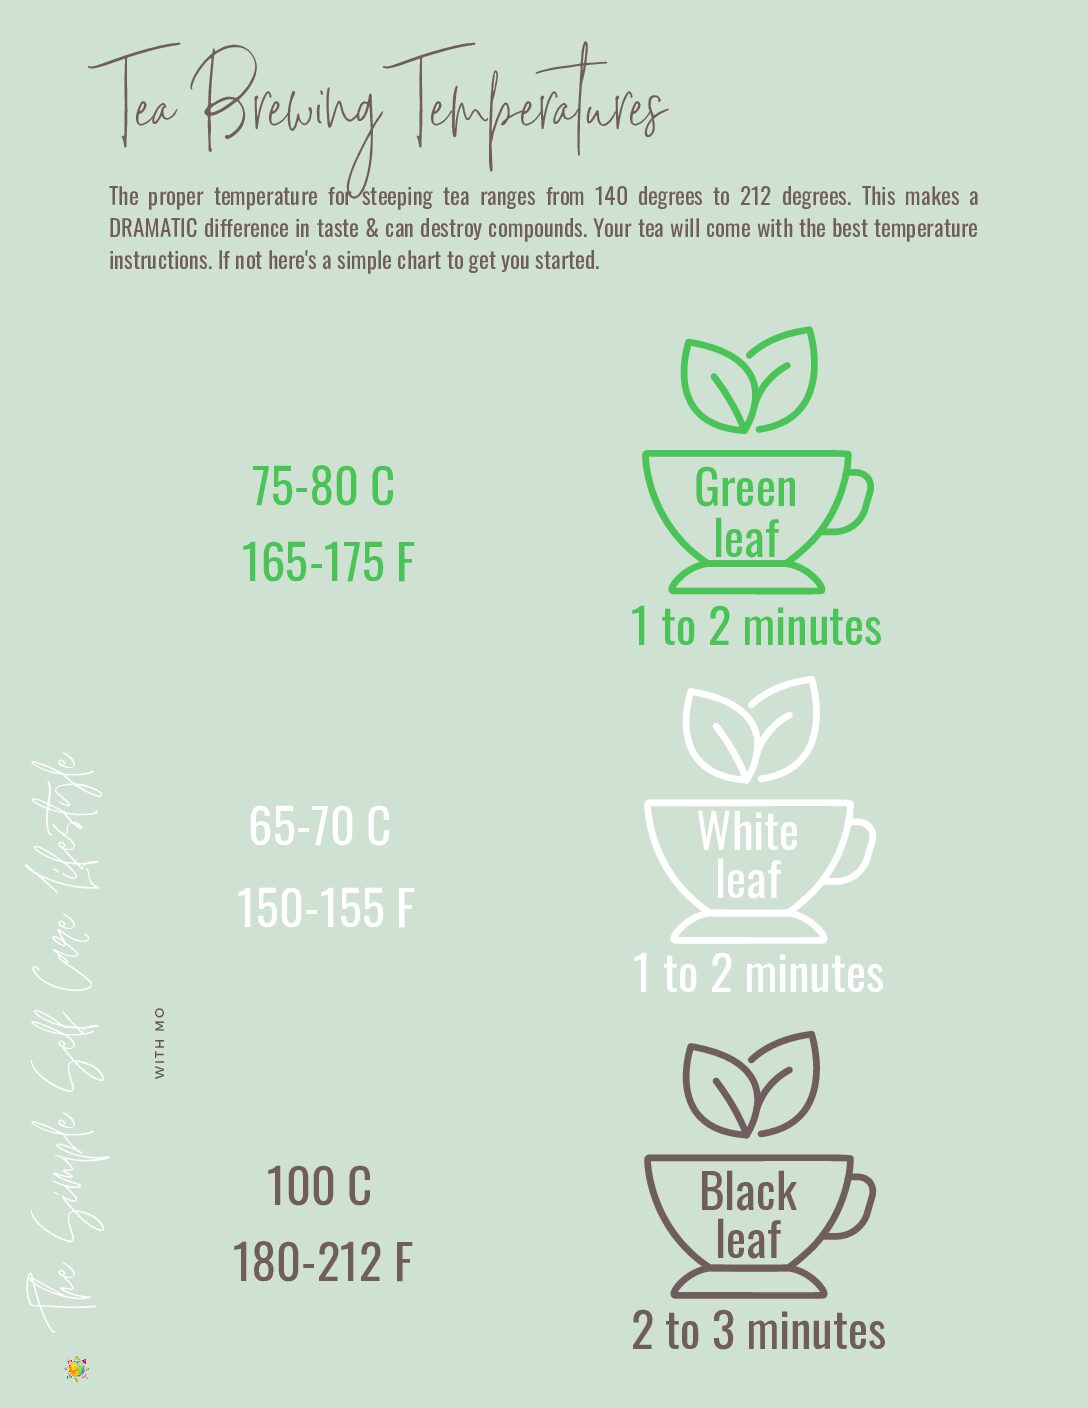 https://thesimpleselfcarelifestyle.com/wp-content/uploads/2022/04/Tea-Brewing-Temperatures-1-pdf.jpg